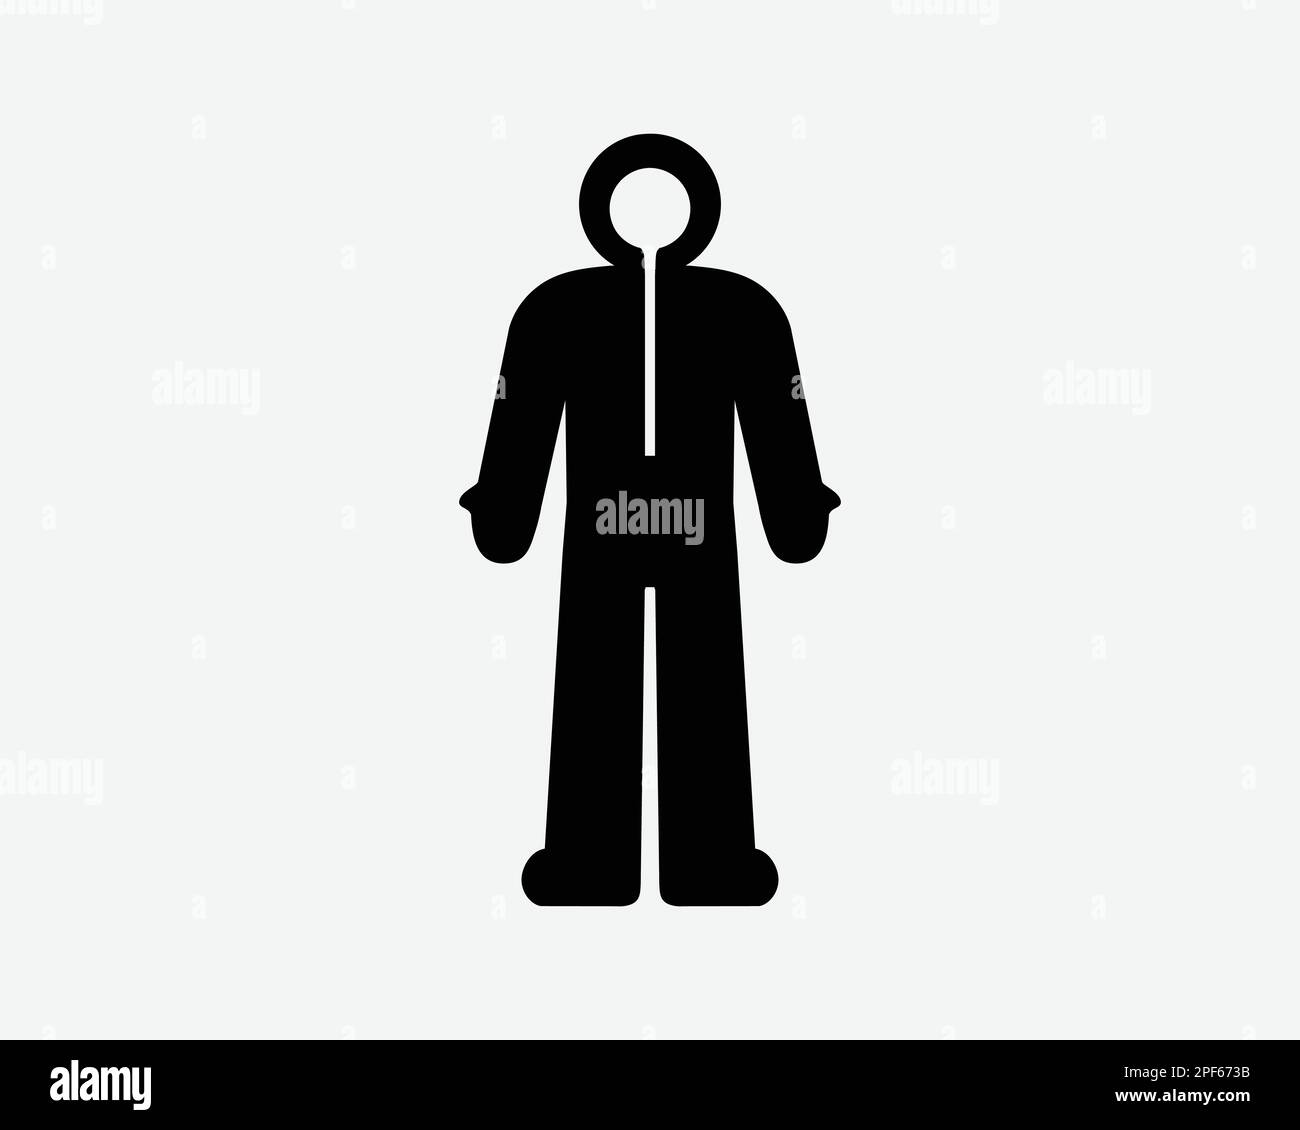 Hazmat Suit Safety Full Body Medical Protection Clothing Black White Silhouette Sign Symbol Icon Clipart Graphic Artwork Pictogram Illustration Vector Stock Vector